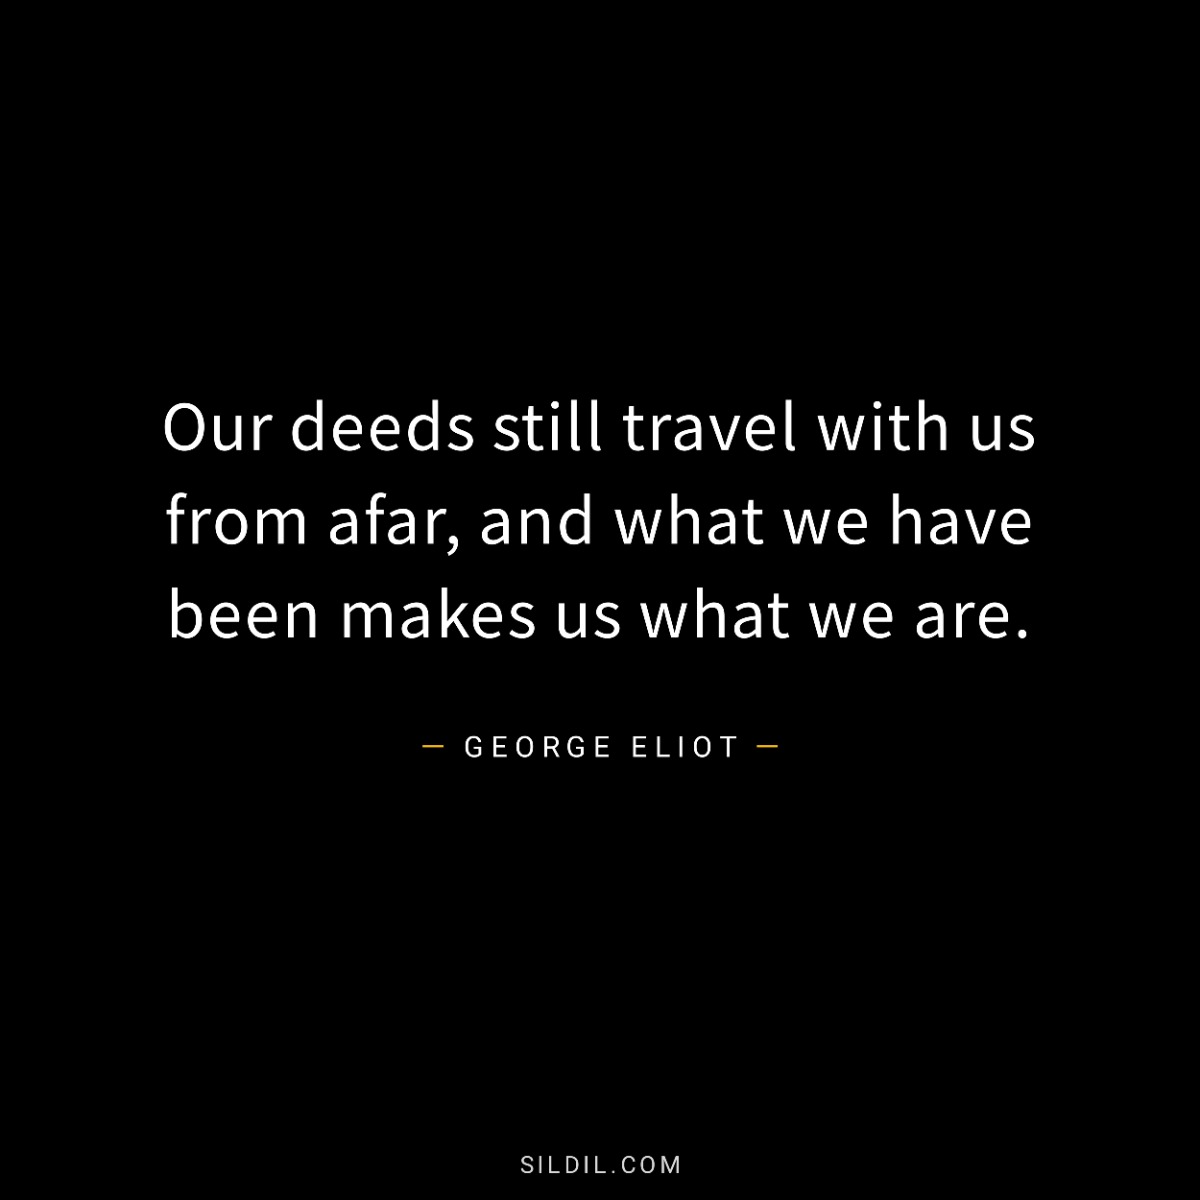 Our deeds still travel with us from afar, and what we have been makes us what we are.